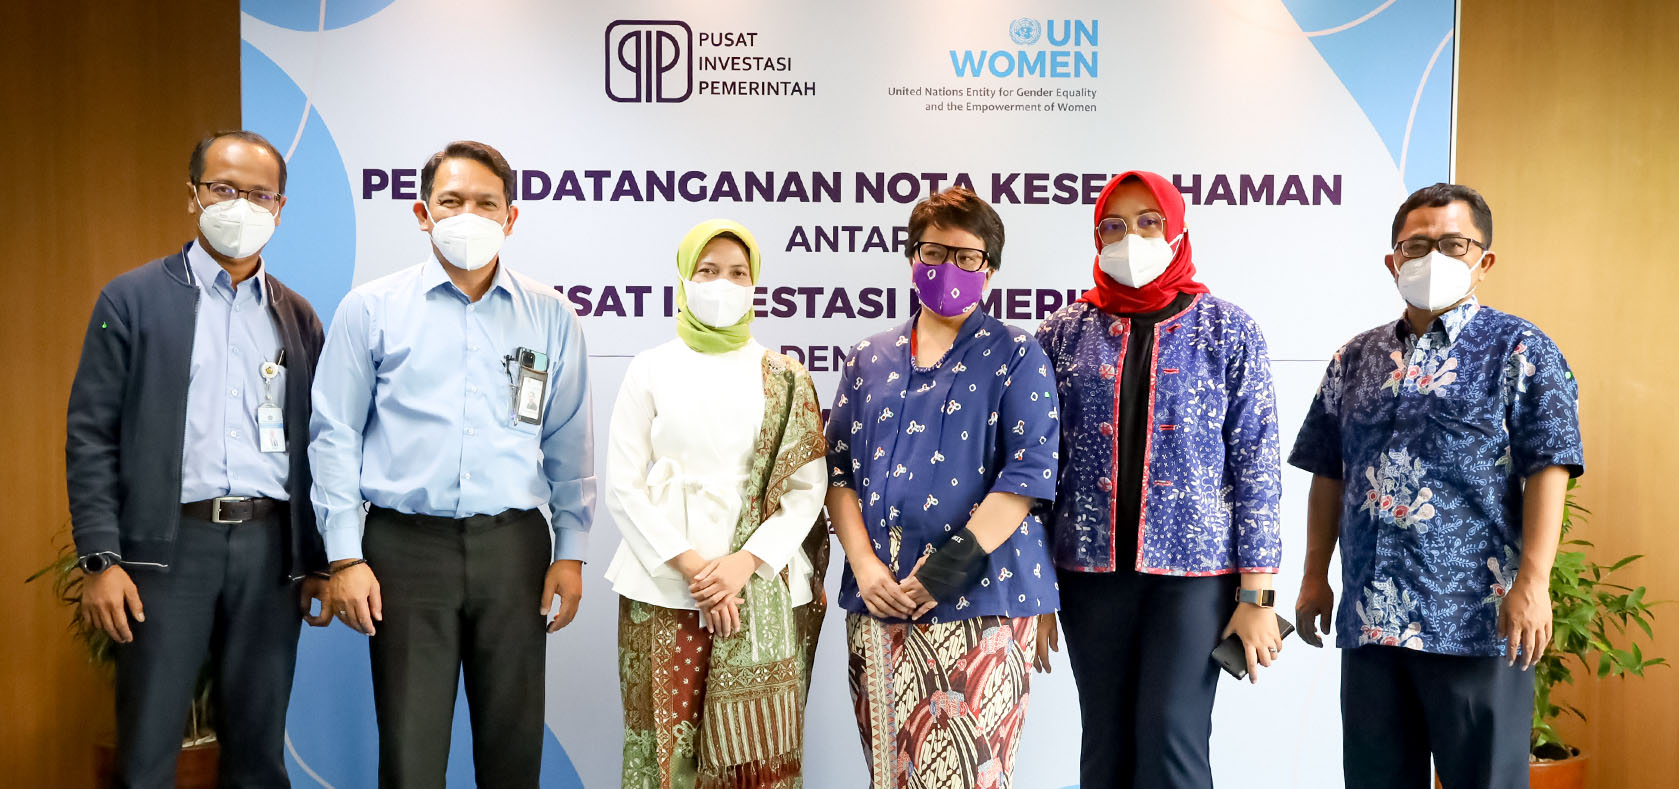 Commemoration photo between delegation of BLU-PIP and UN Women Indonesia after the signing event has finished. Photo: Pusat Investasi Pemerintah